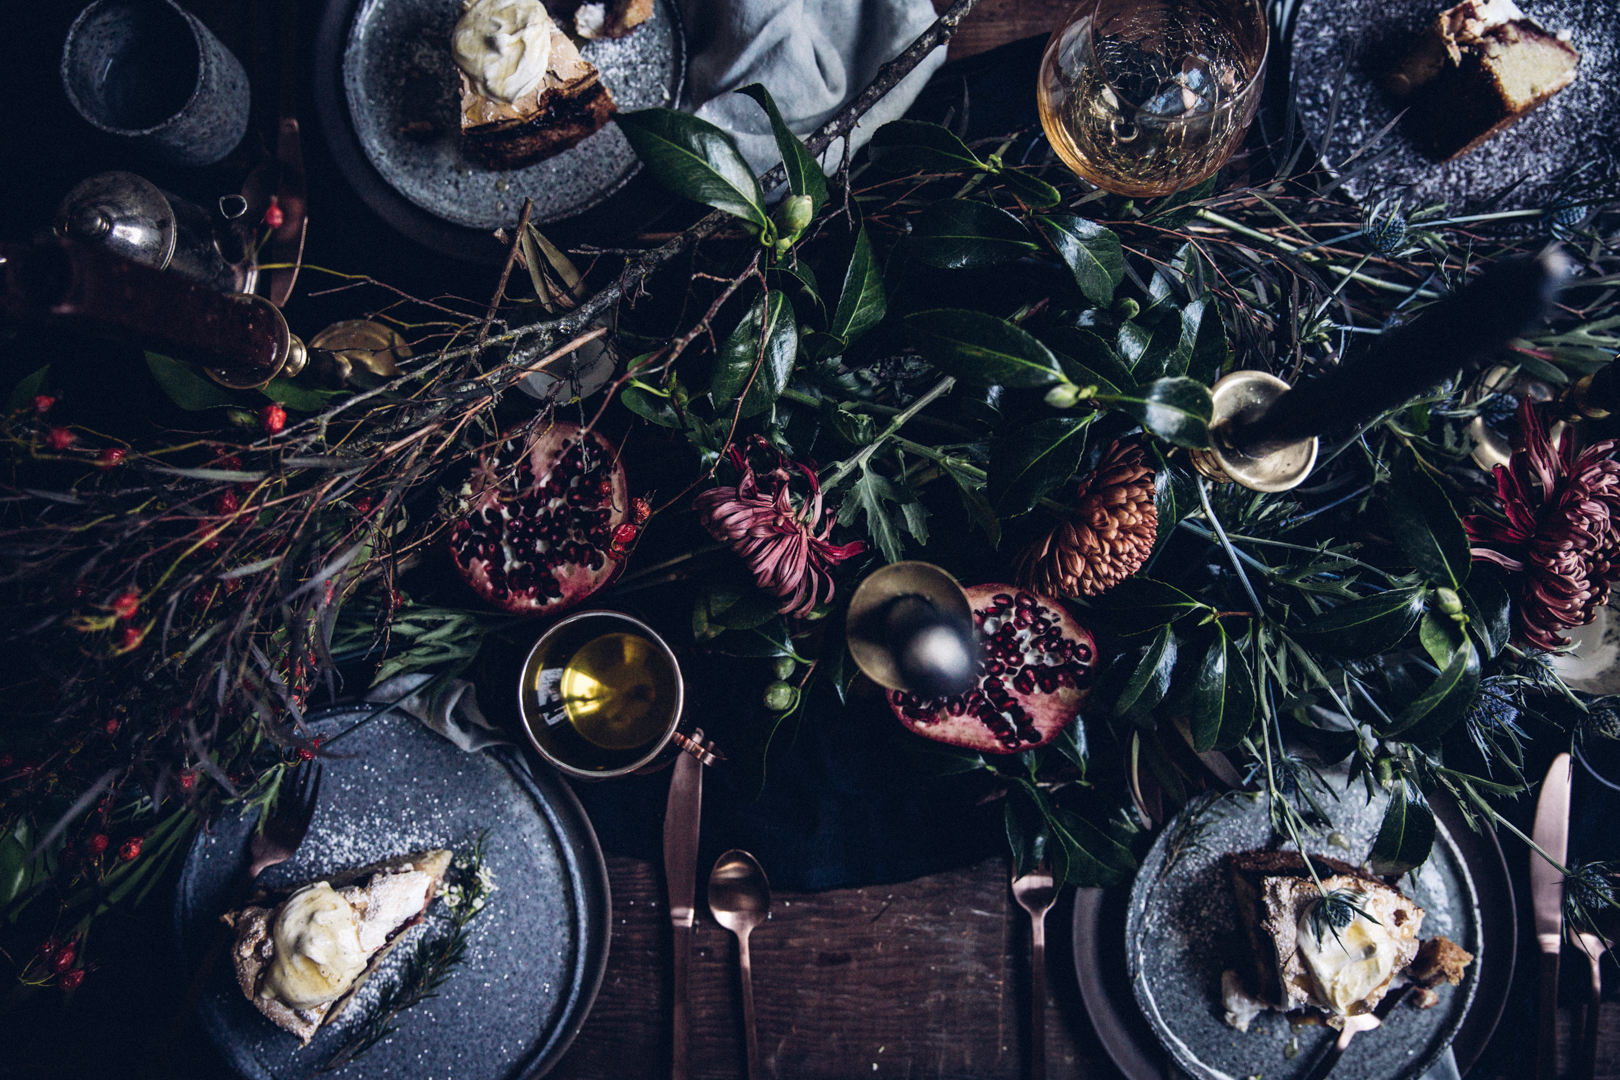 holiday-gatherings-photography-styling-by-christiannkoepke-com-12